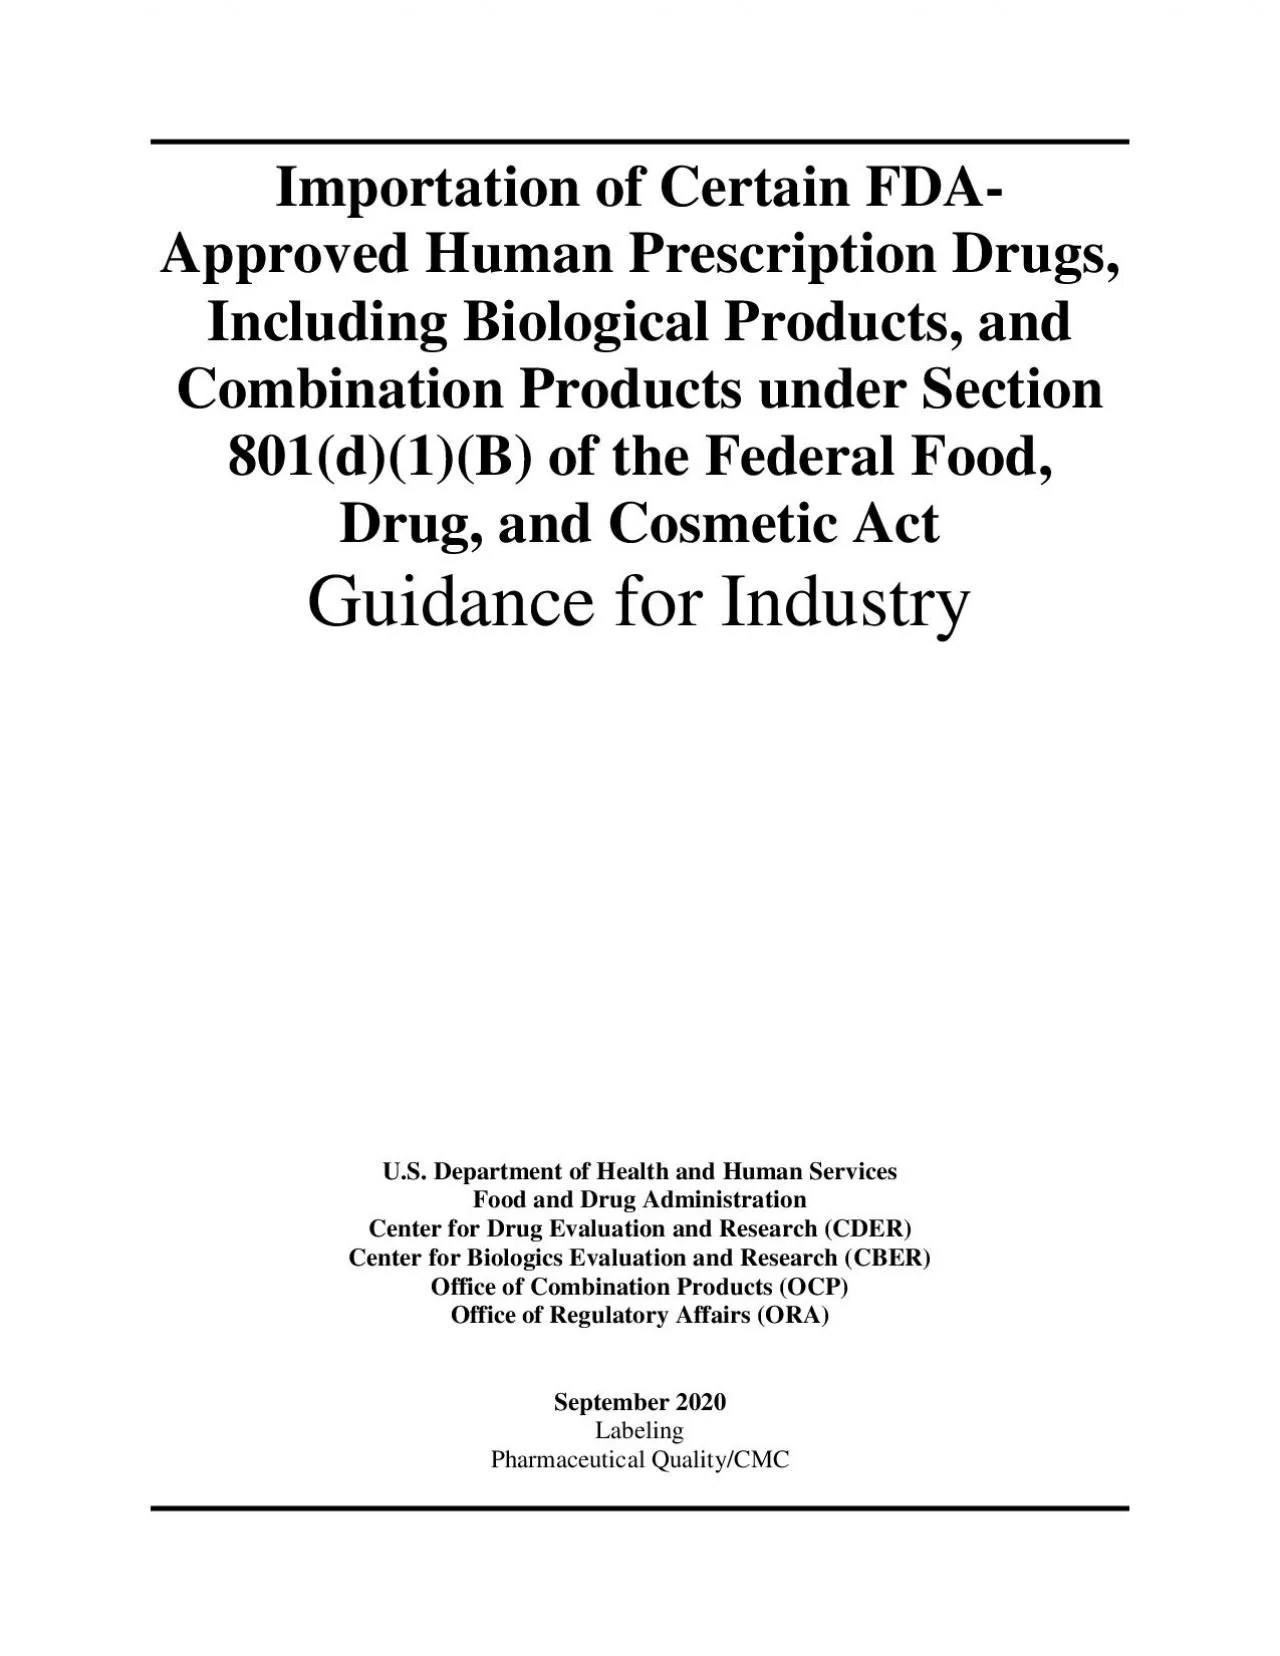 Importation of Certain FDAApproved Human Prescription Drugs Including